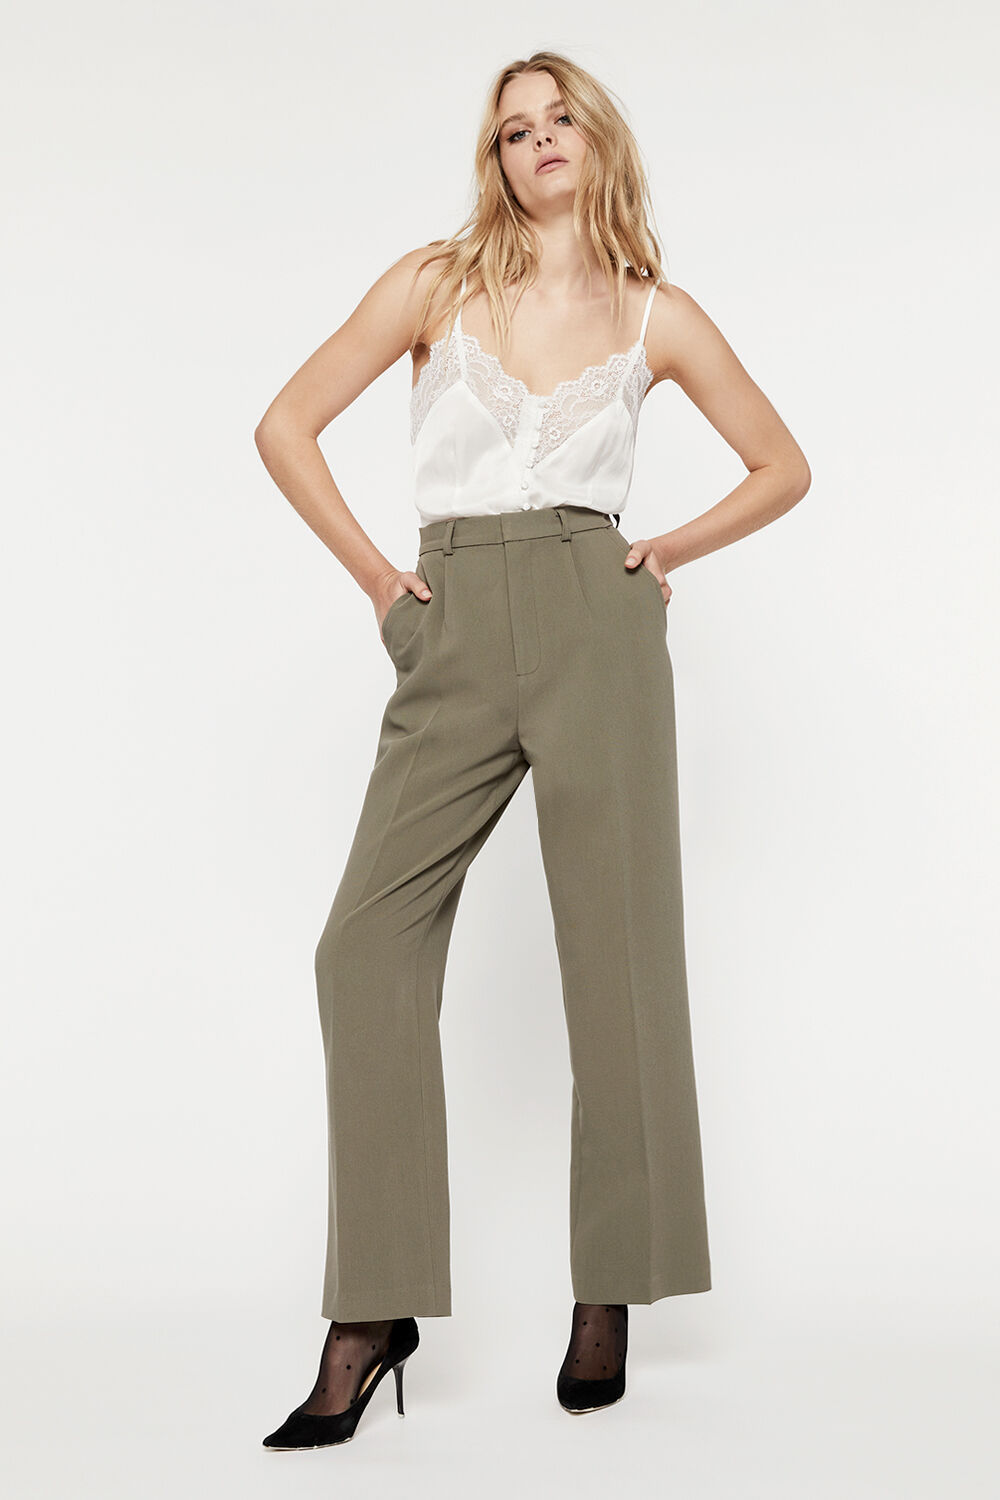 MAISON STRAIGHT LEG PANT in colour IVY GREEN